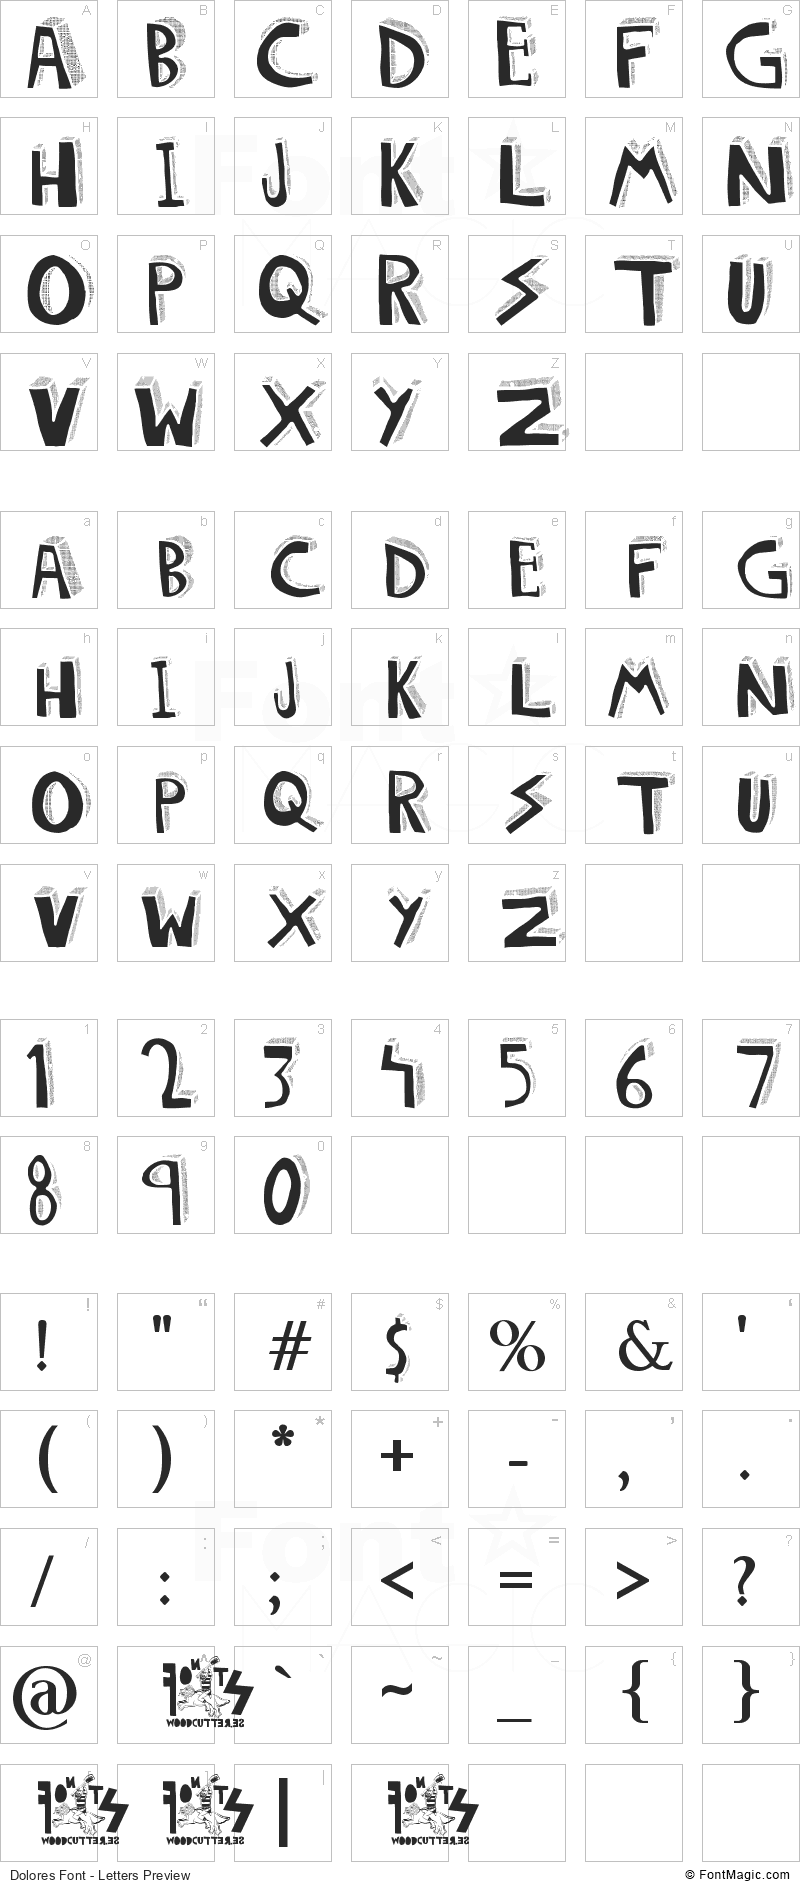 Dolores Font - All Latters Preview Chart